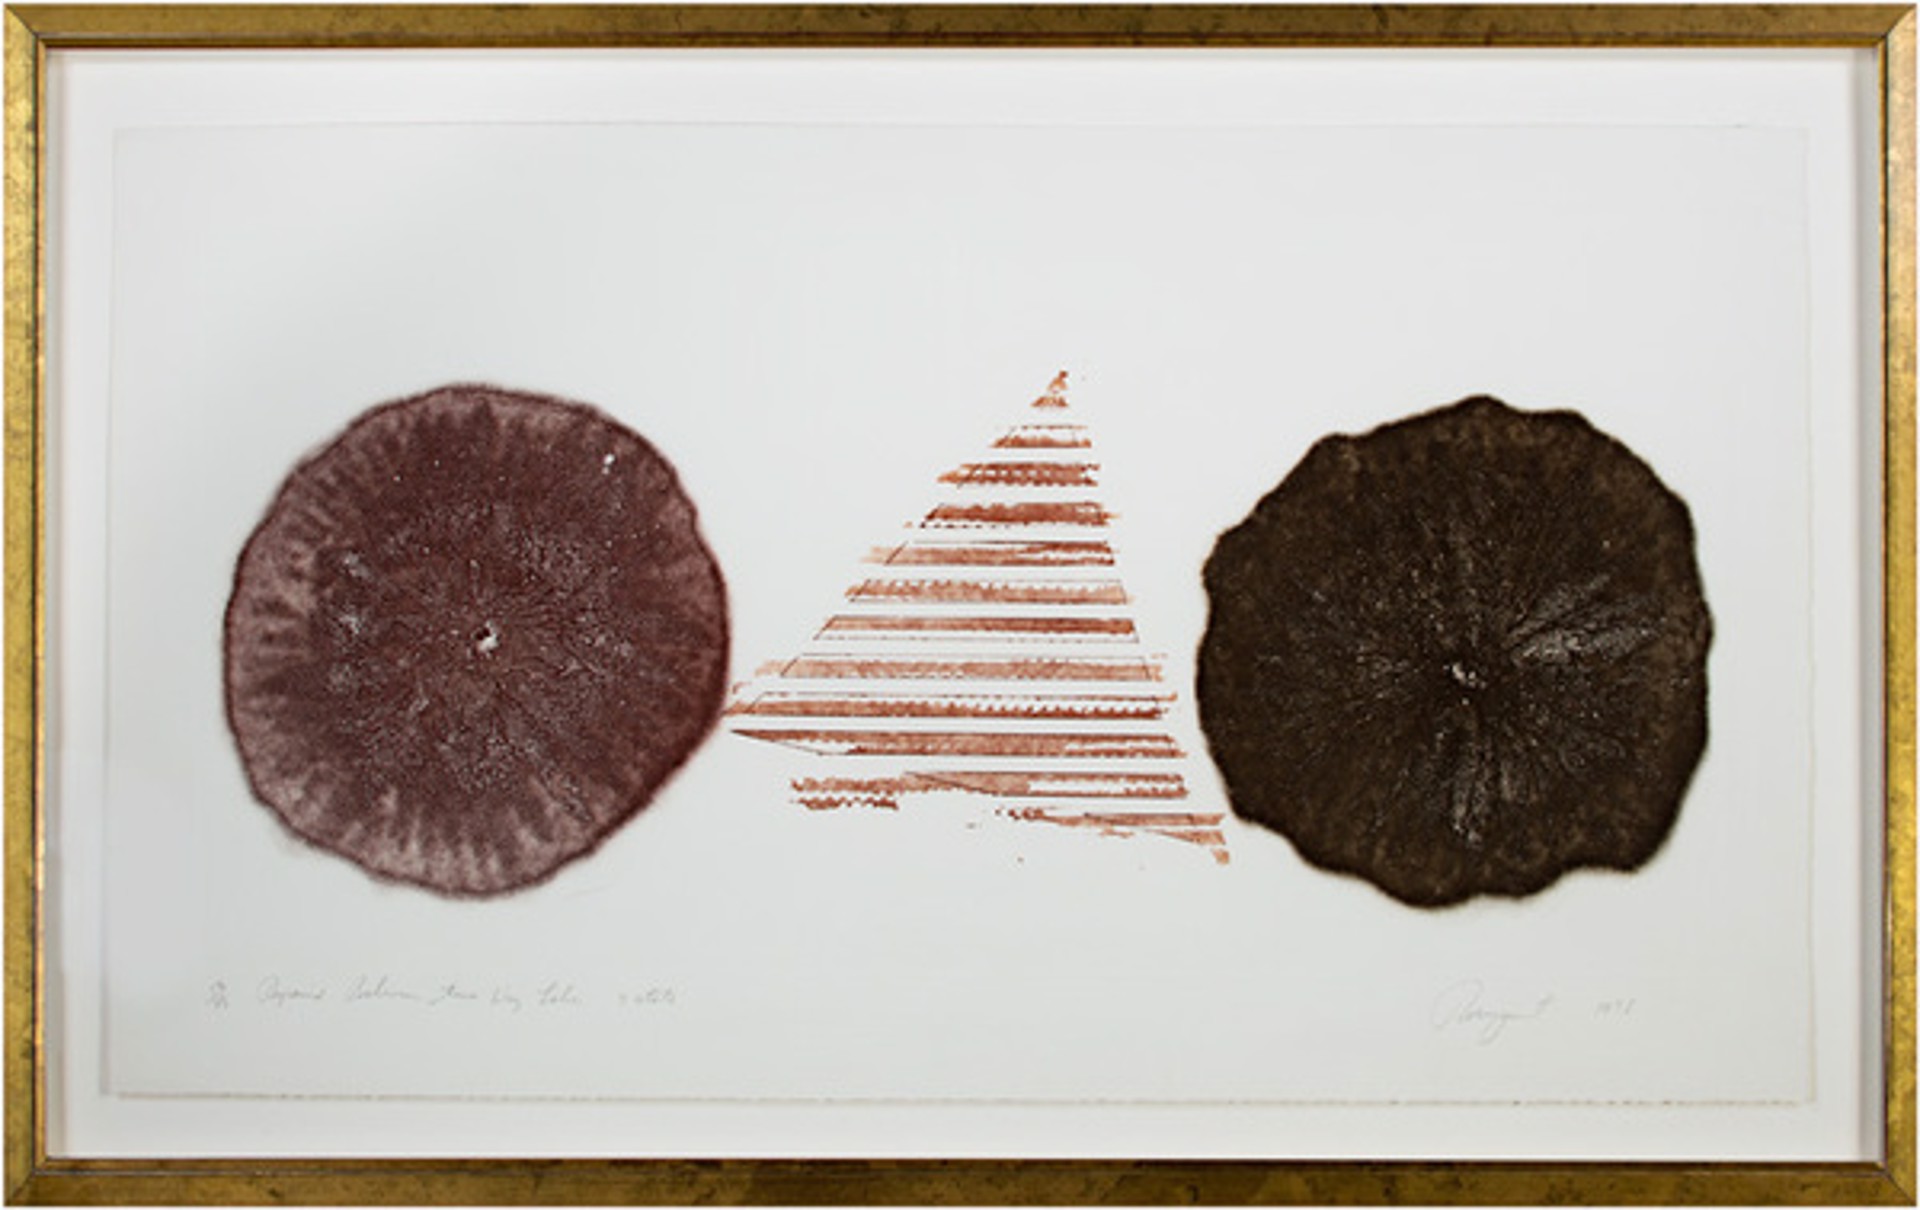 Pyramid Between Two Dry Lakes Ed: 56/78 by James Rosenquist